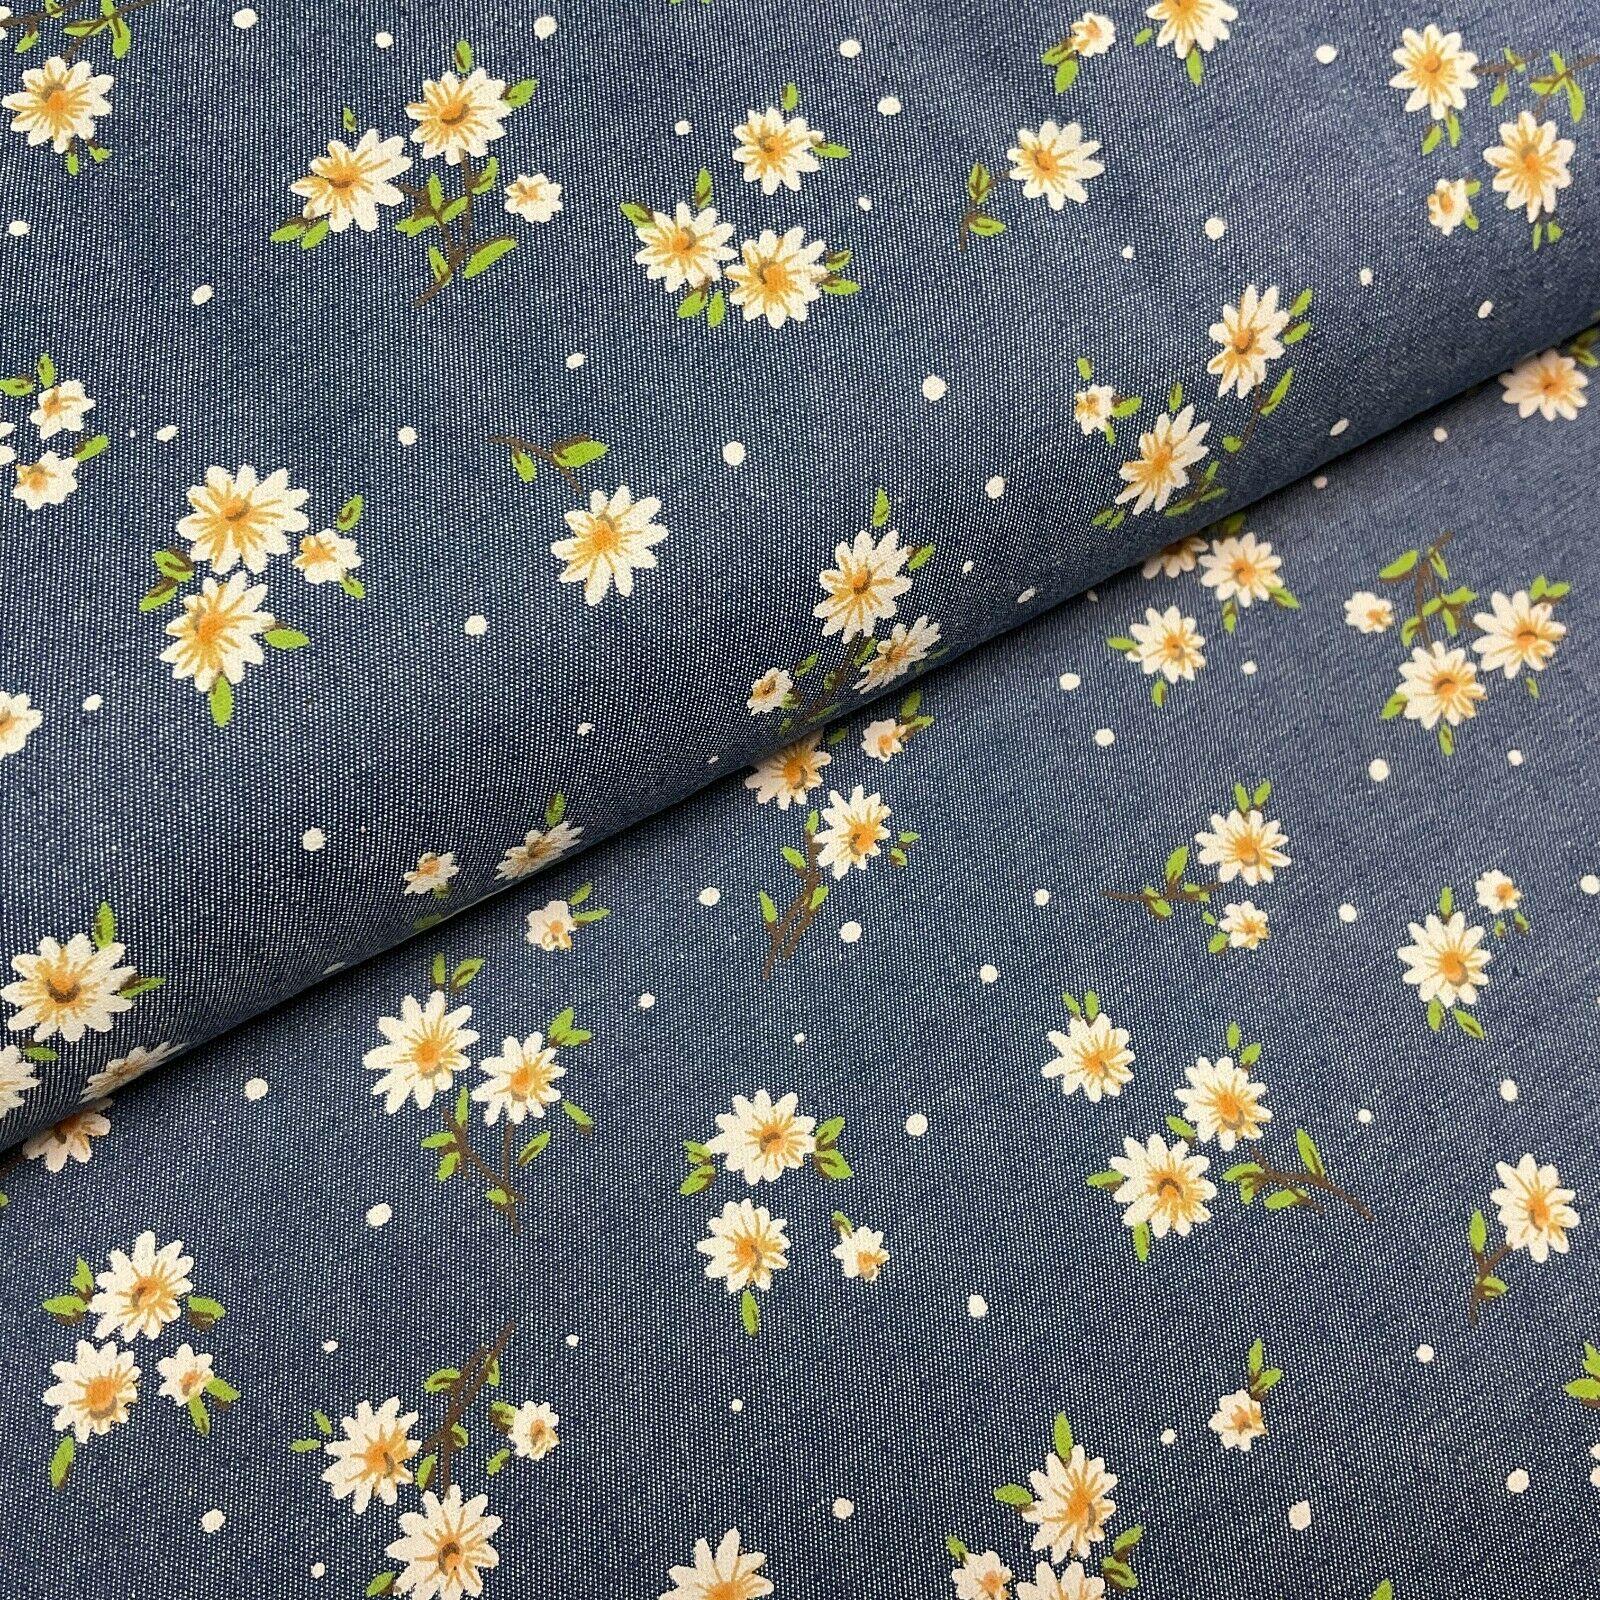 Floral Printed 100% Cotton Chambray Denim Mixed Designs Dress Fabric 147cm M1604